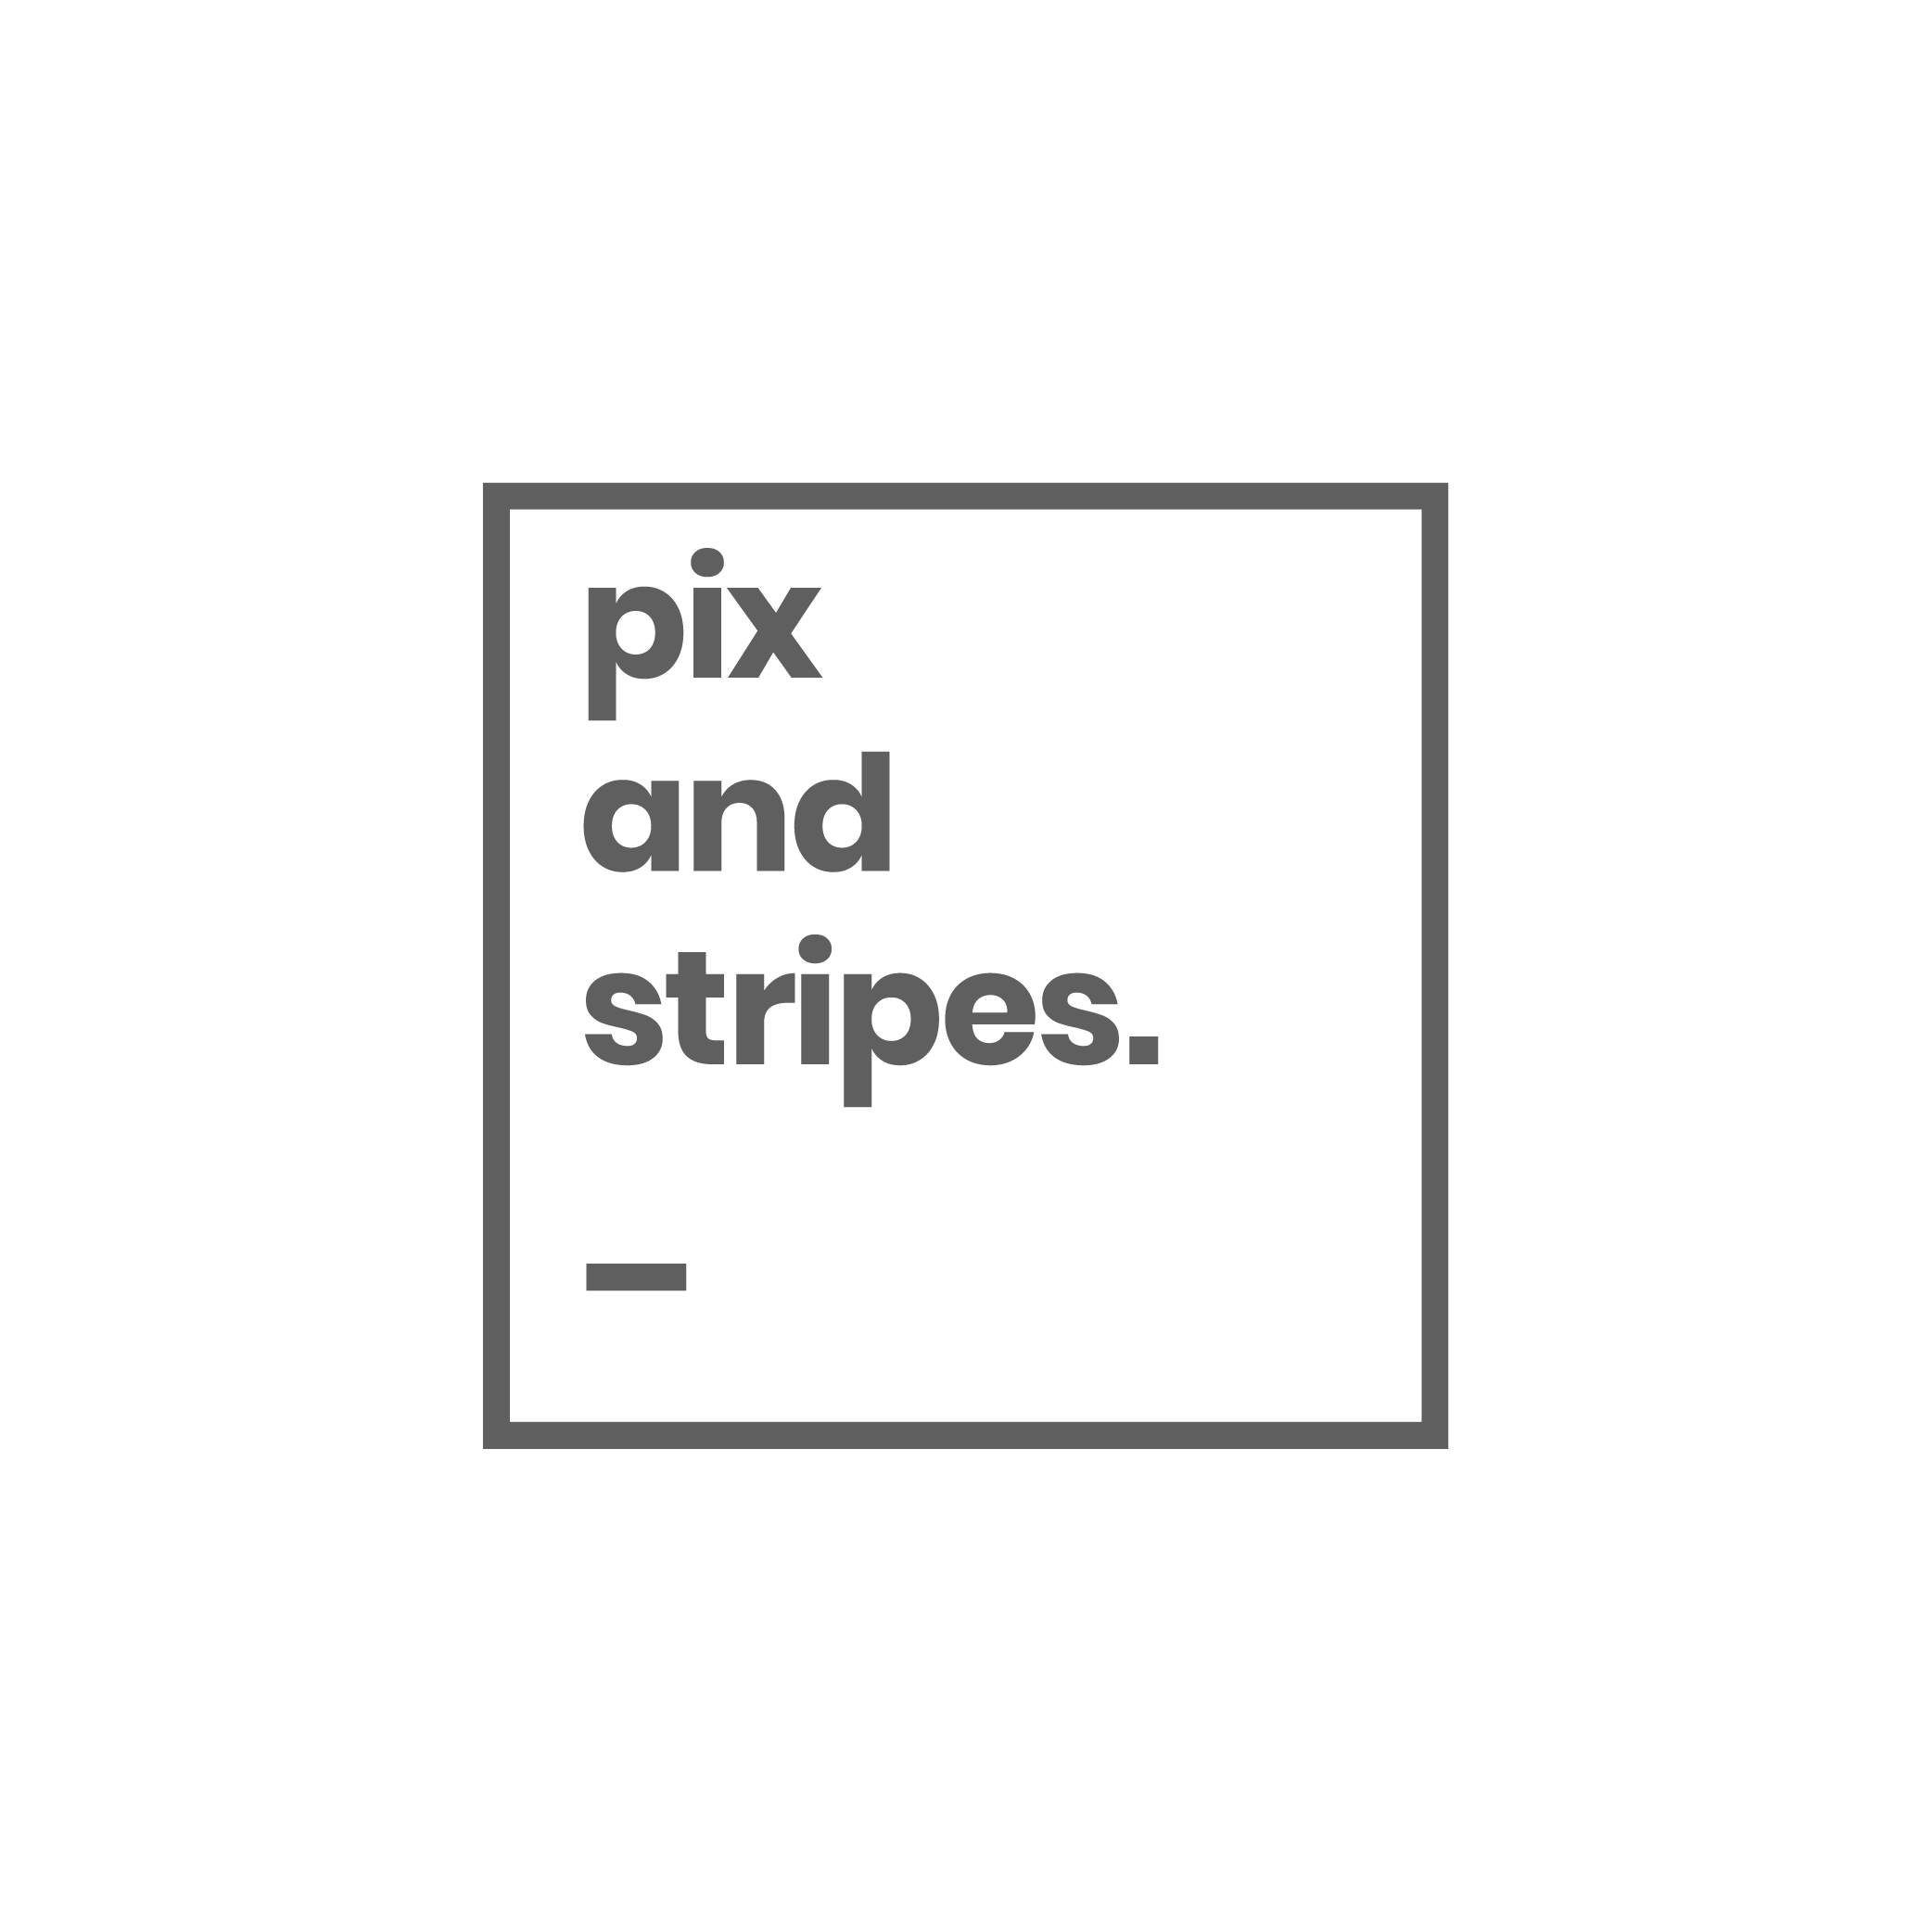 pix and stripes